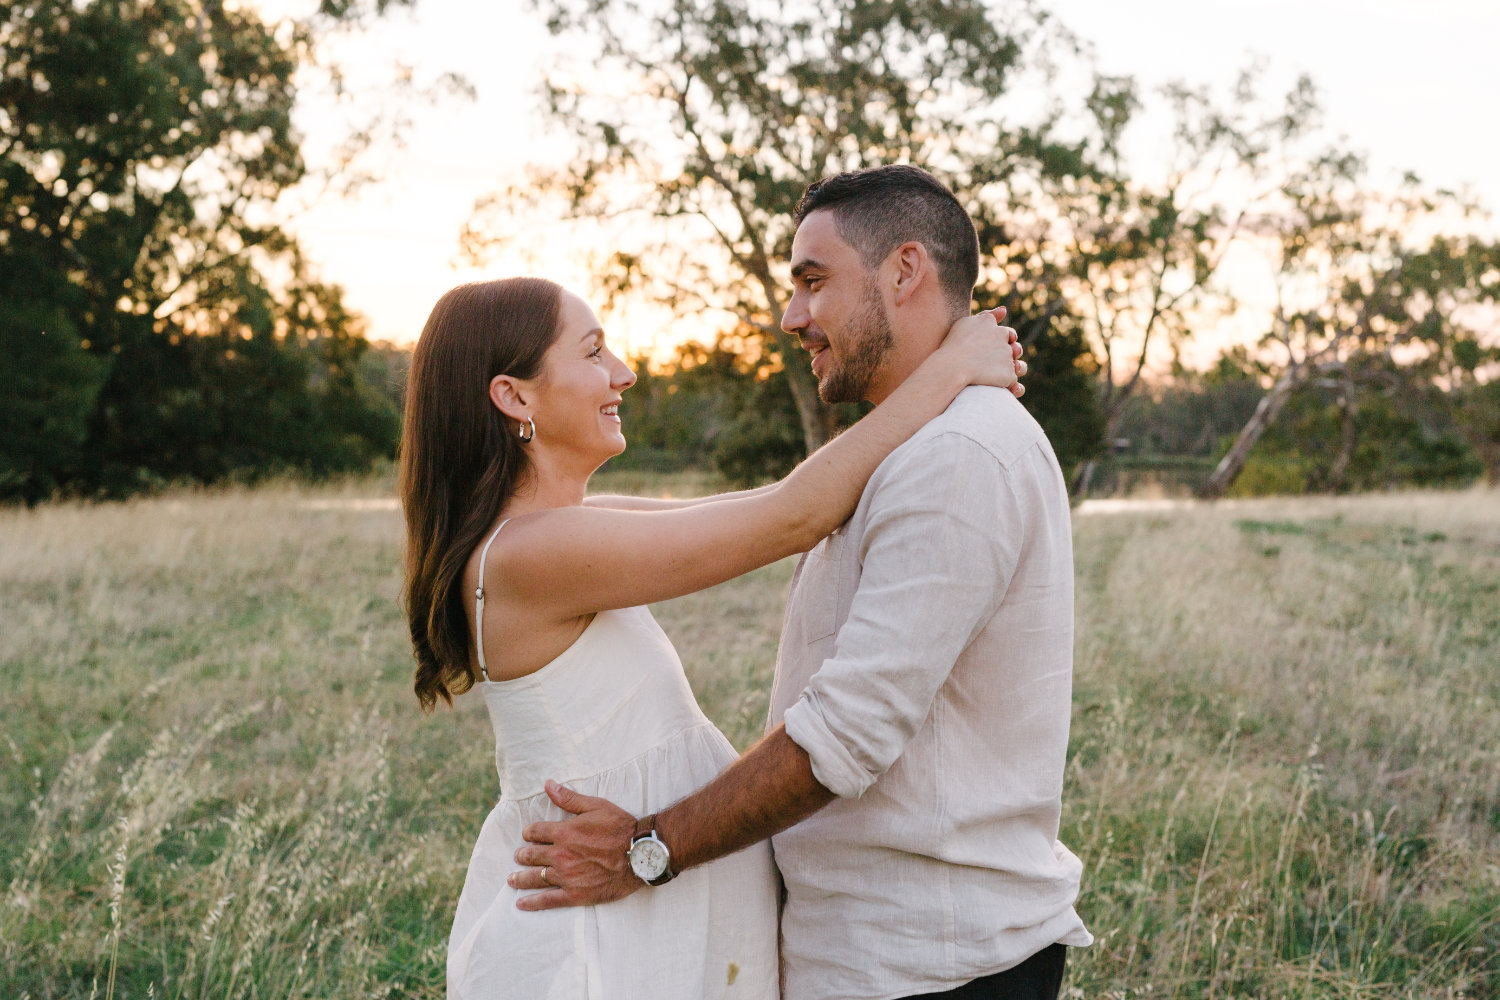 Outdoor Maternity Photoshoot with Yvette and Mark at Lake Nagambie